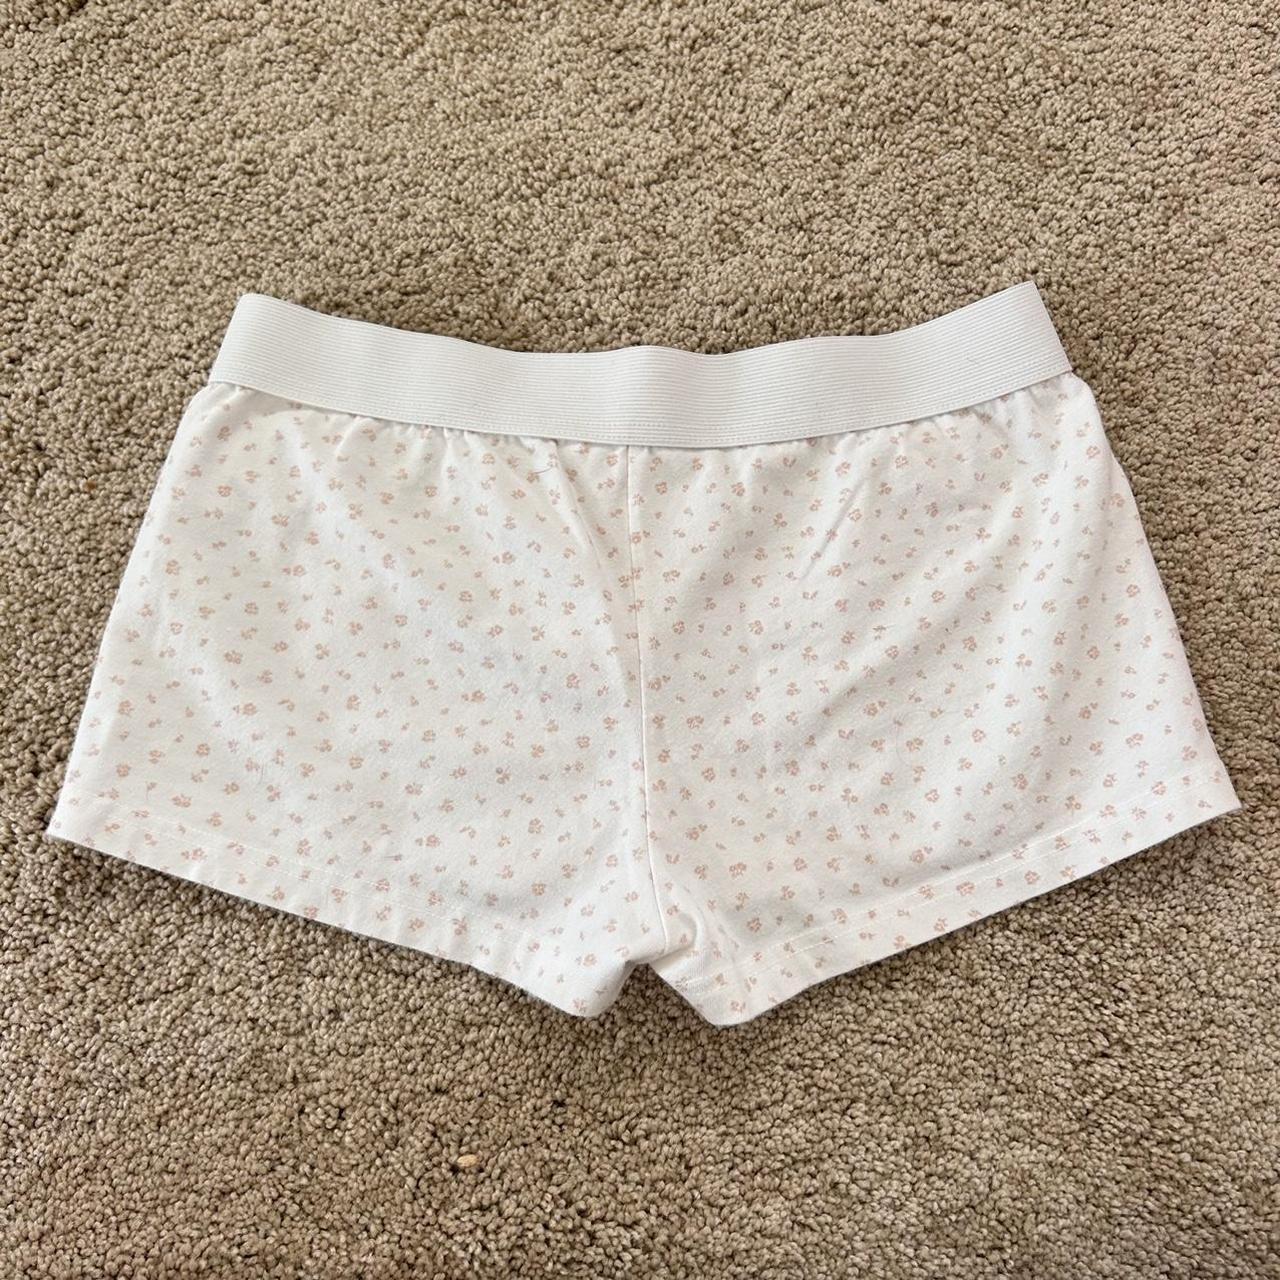 Brandy Melville White and Pink Floral Boxer... - Depop